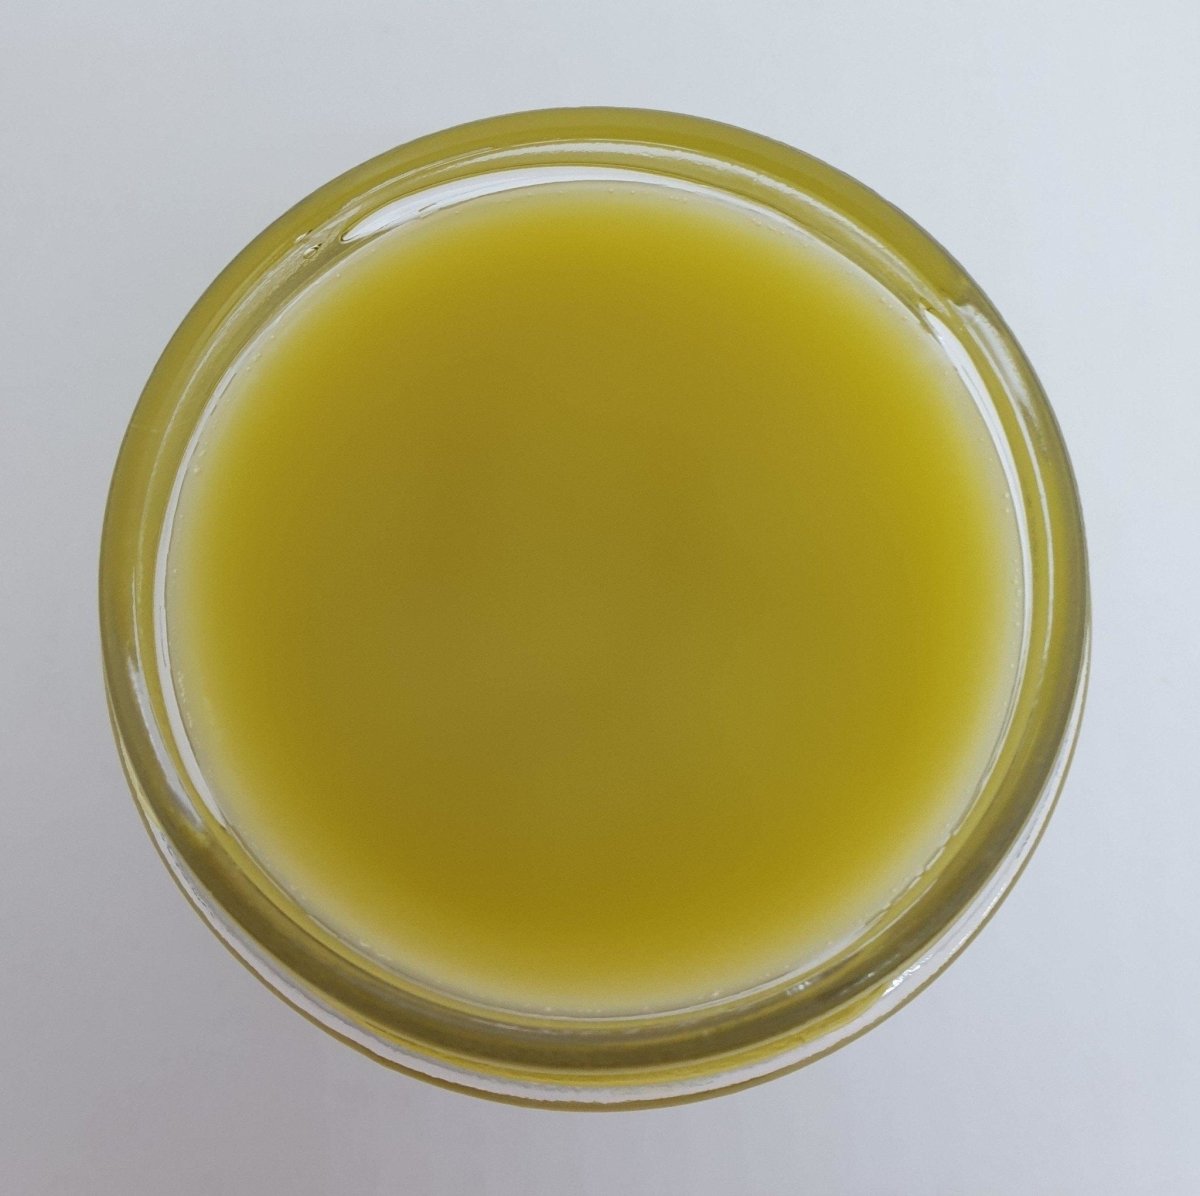 Foot Rescue Botanical Balm with Tea Tree, Rosemary, Mint & Lavender - Flying Wild